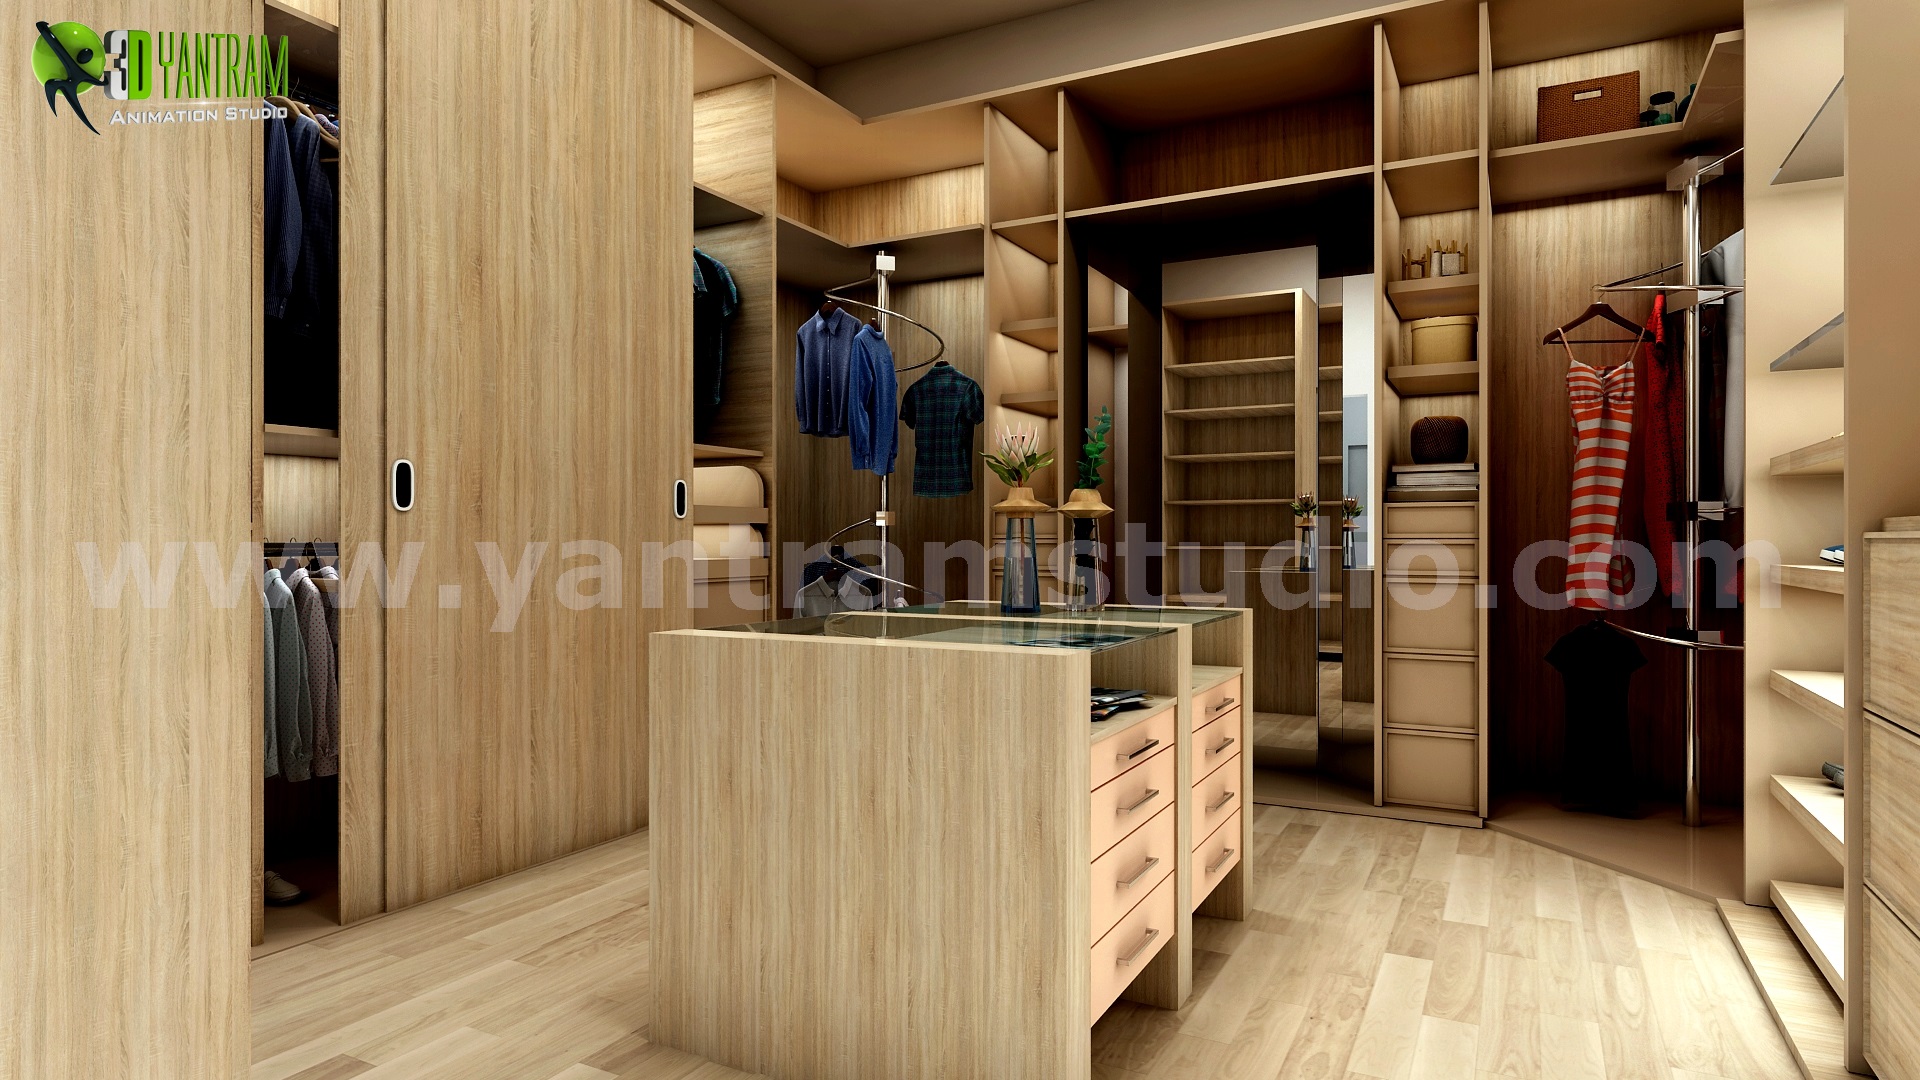 3d Interior visualization of  Bathroom Cloth Cupboard by Yantram Architectural Modeling Firm, Chicago, Illinois